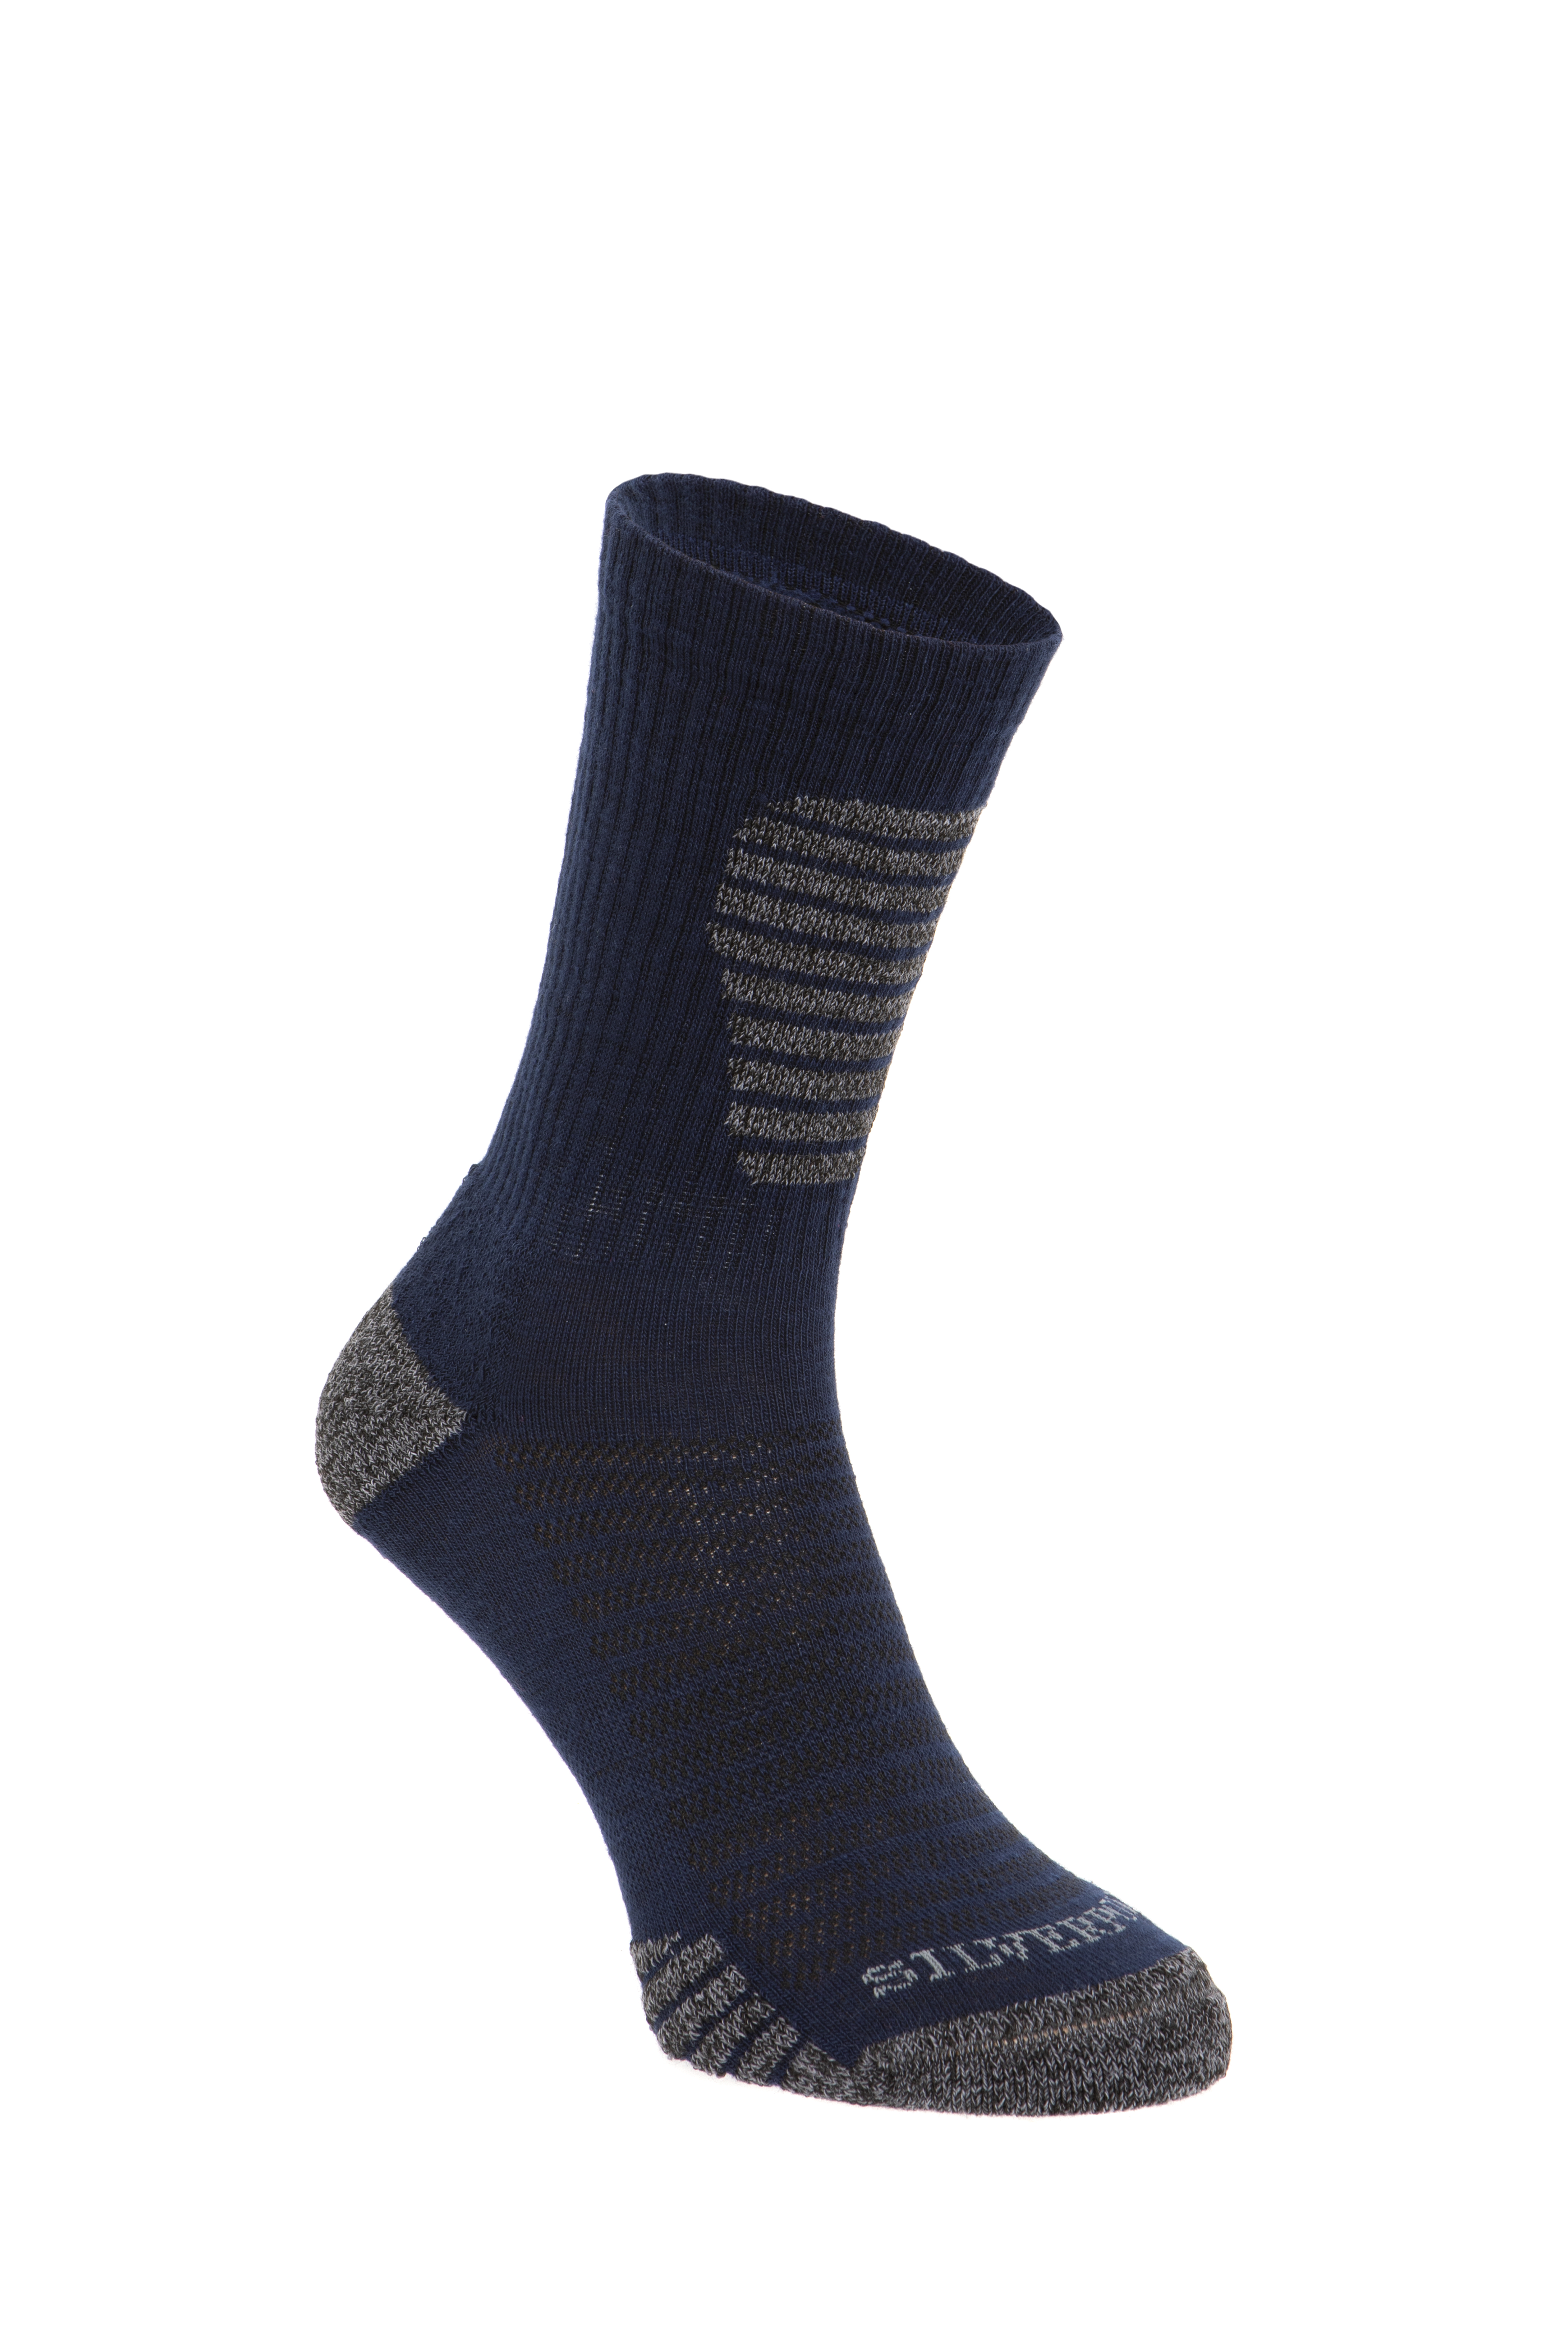 Silverpoint_Pace_Performance Crew_Sock_navy